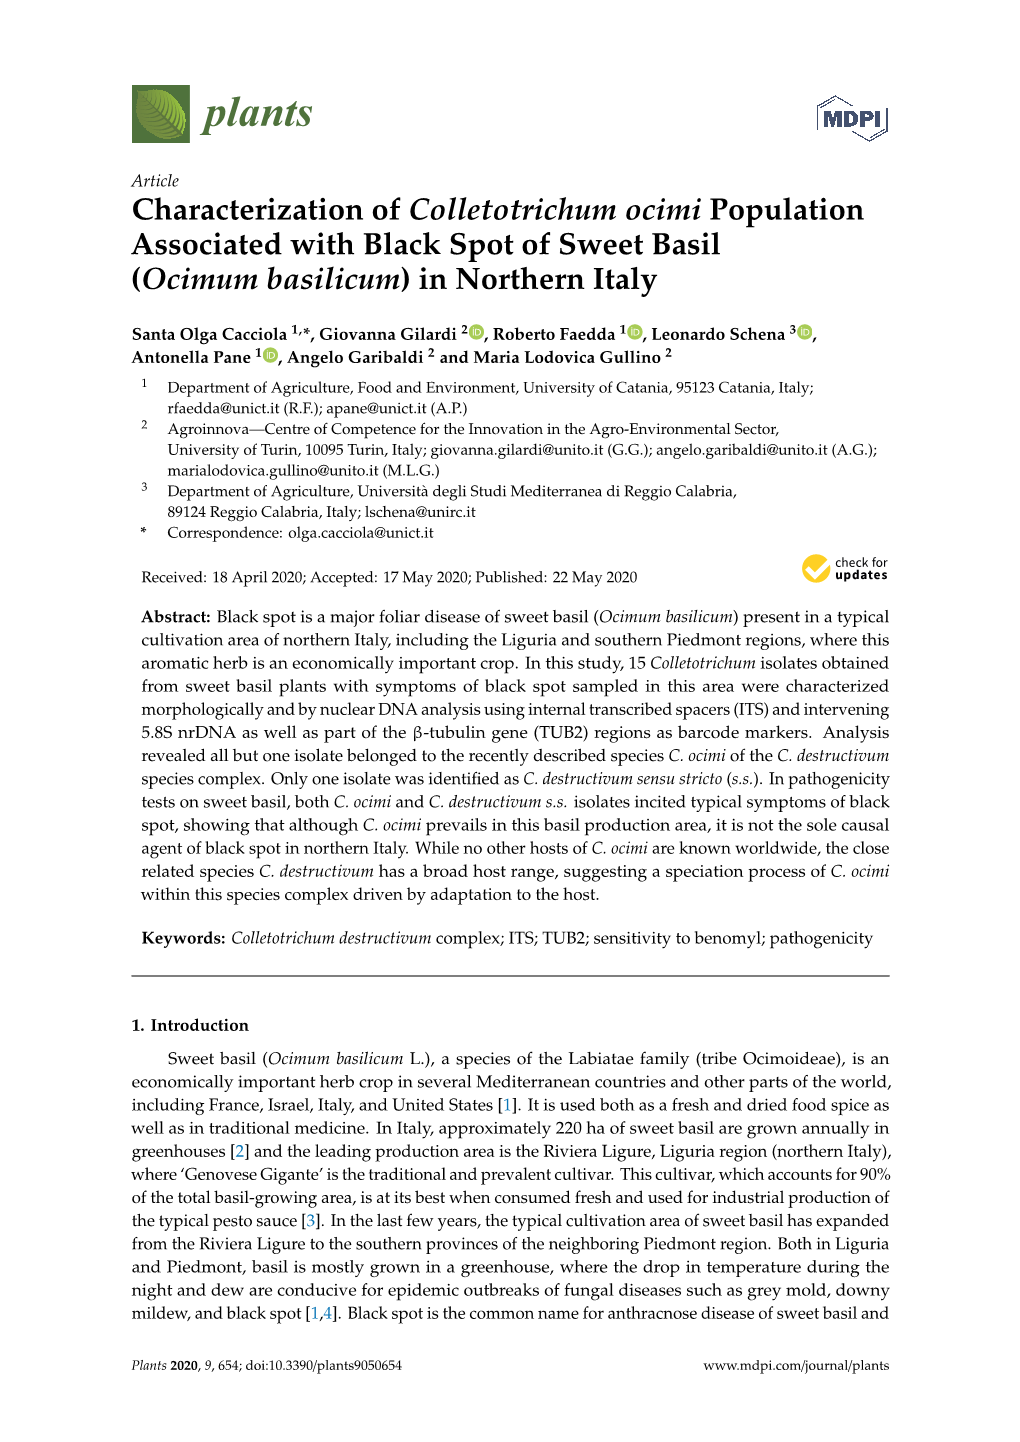 Characterization of Colletotrichum Ocimi Population Associated with Black Spot of Sweet Basil (Ocimum Basilicum) in Northern Italy